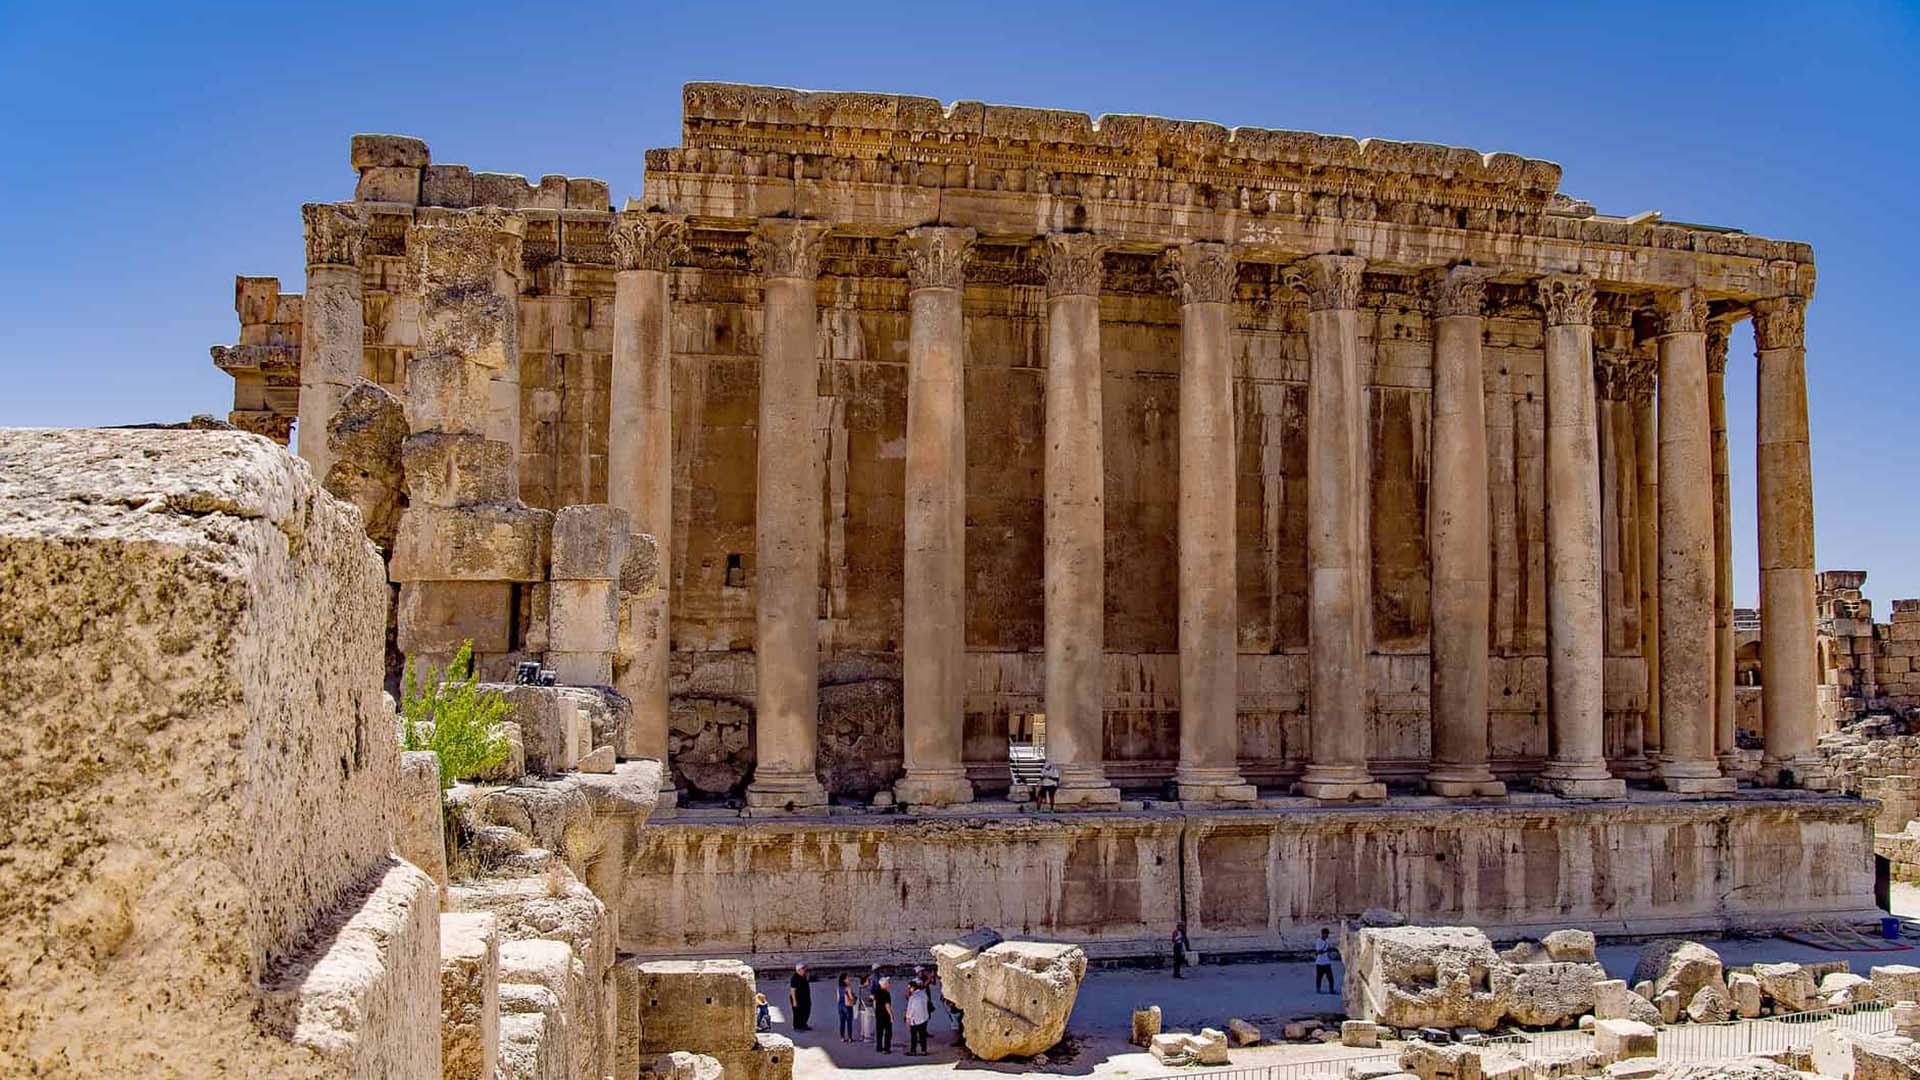 A photograph immortalizes the Temple of Bacchus in Baalbek, a striking testament to the magnificent architectural achievements of the Roman Empire.